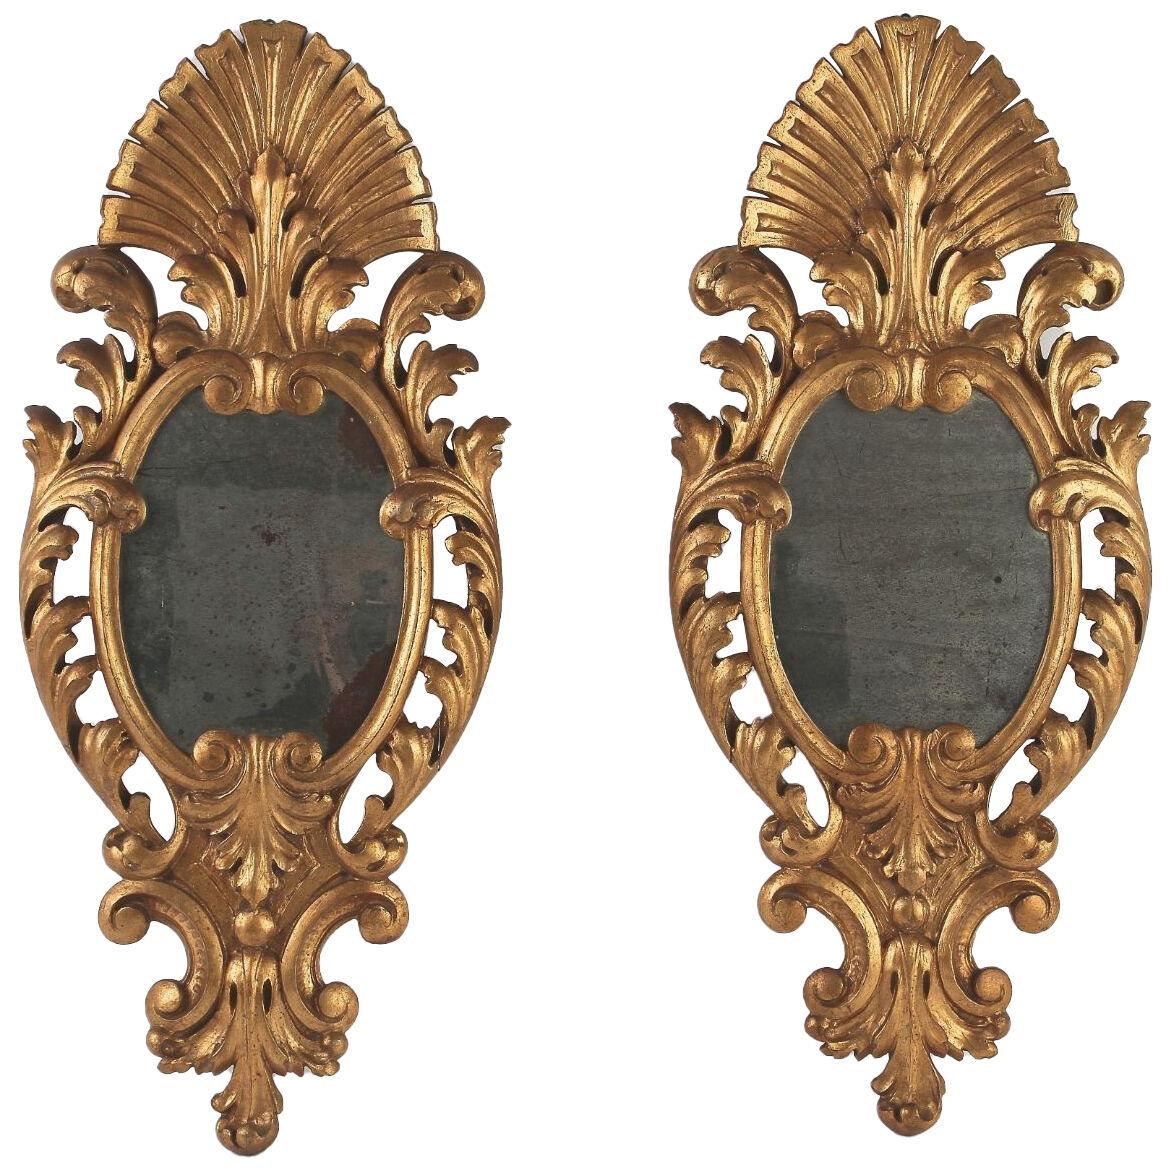 Pair Of 19th Century Hand Carved Gilt Wall Mirrors, Italy ca. 1850